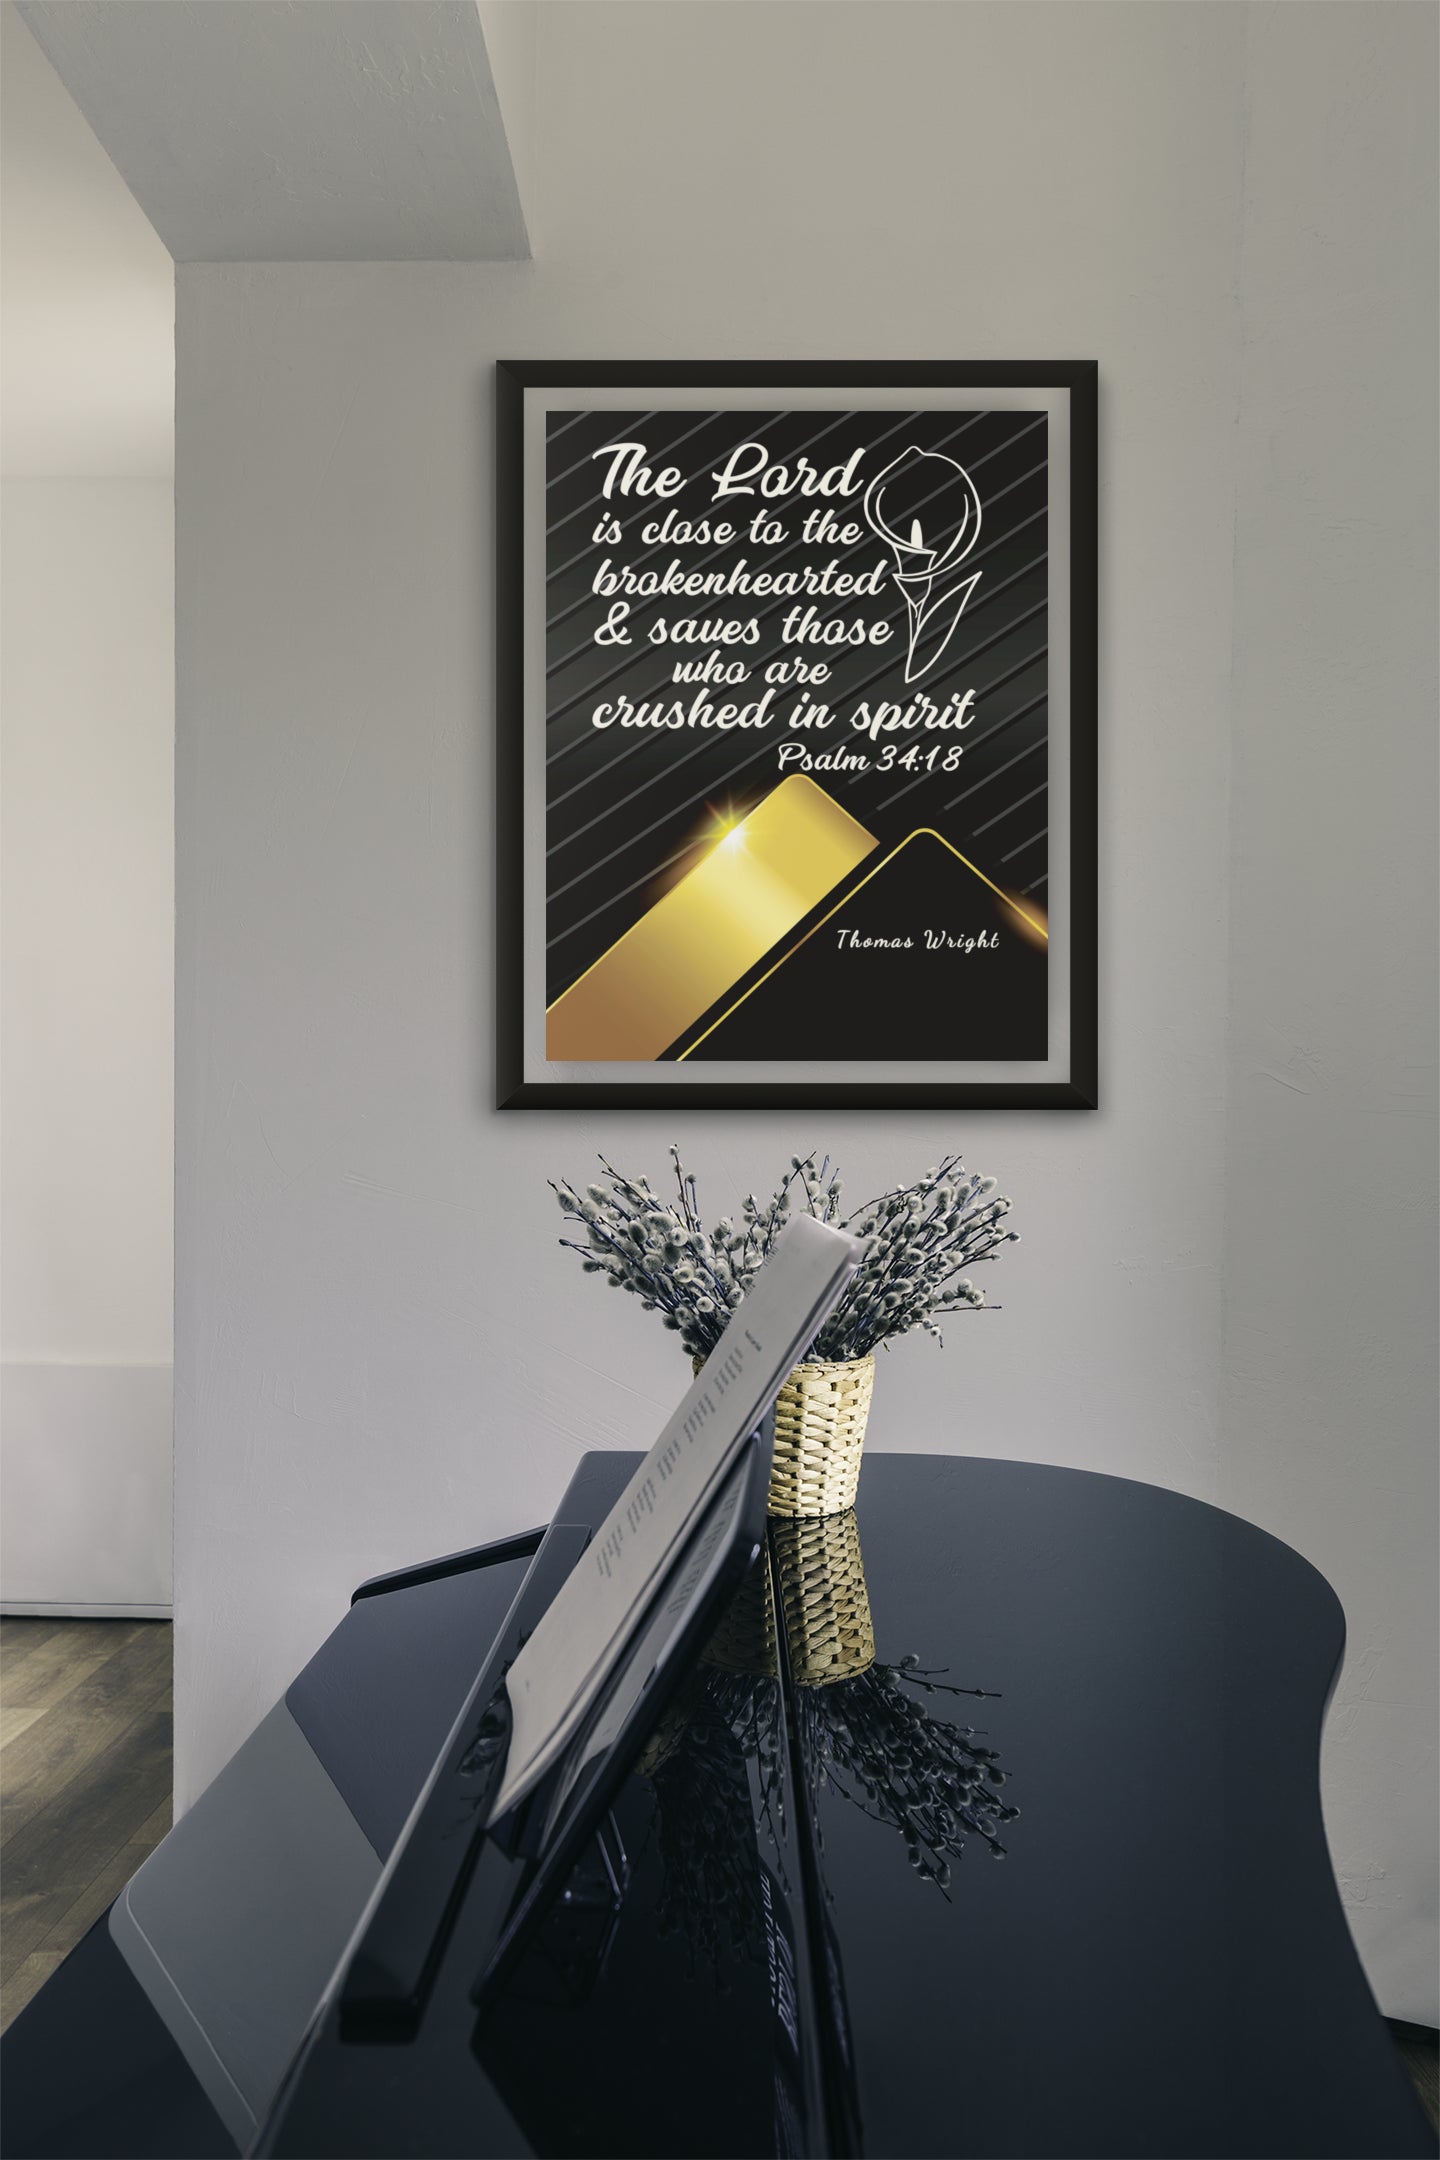 Wall Art - Scriptural Personalizable Posters - Psalms 34:18